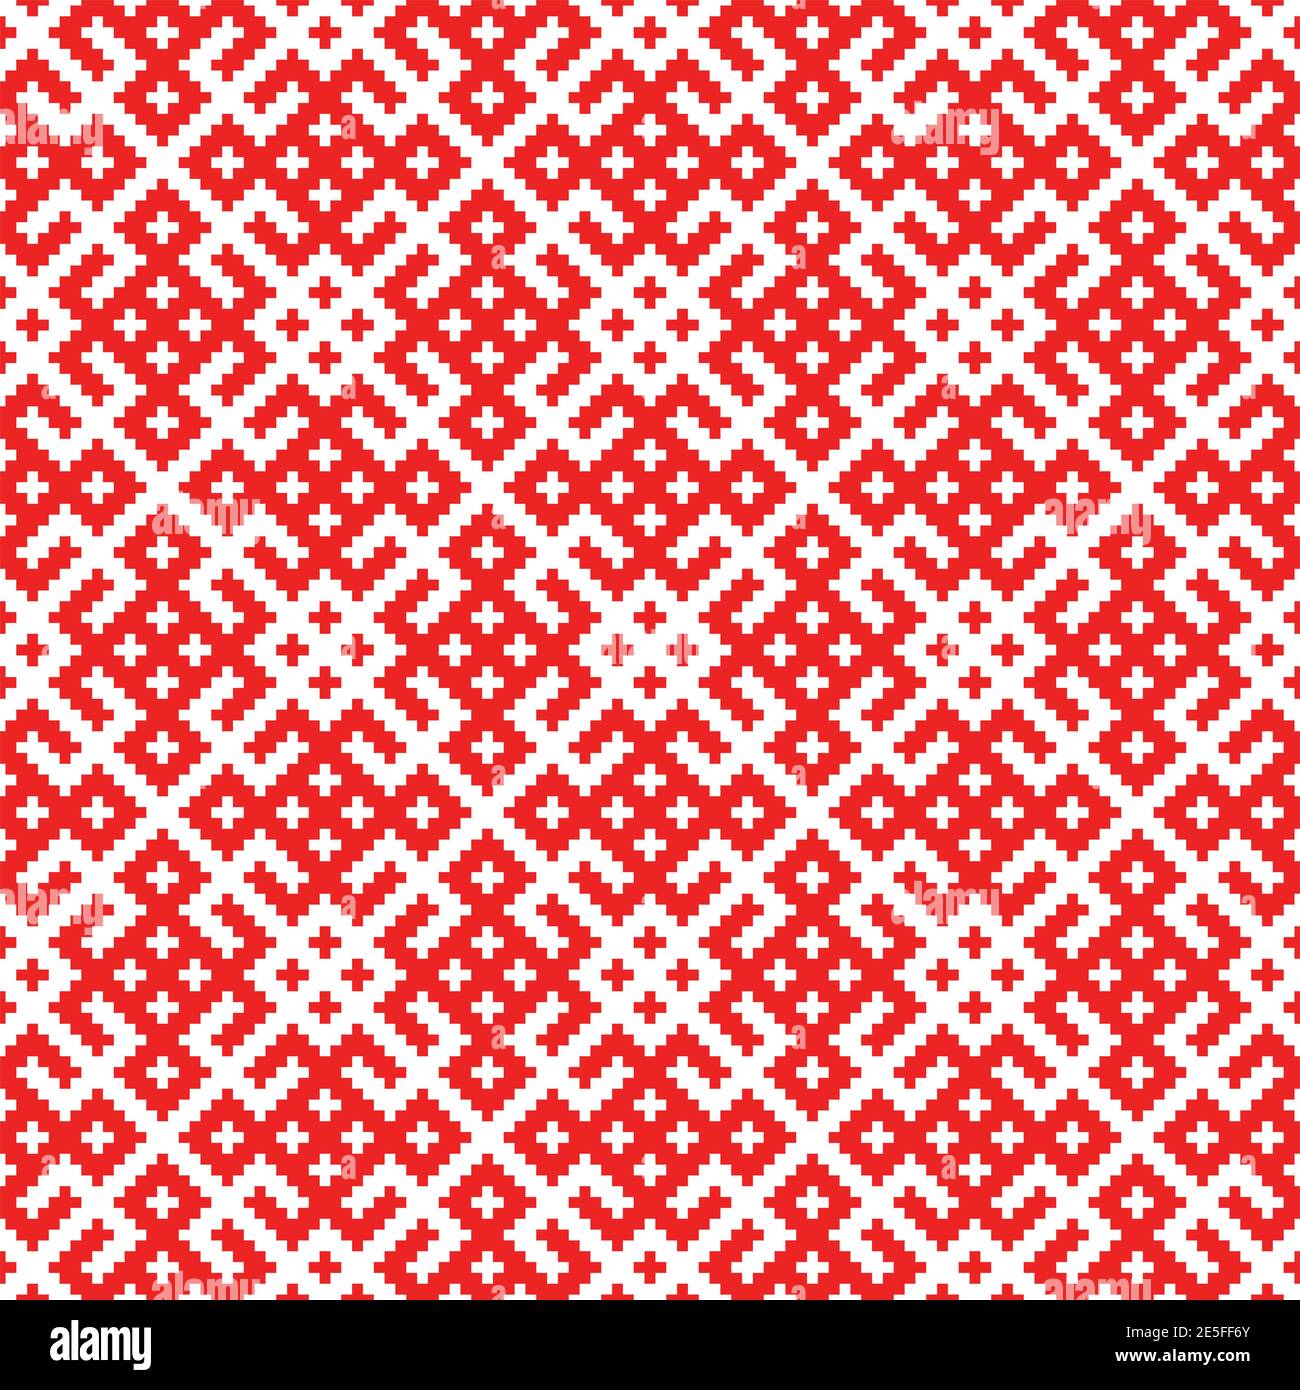 Seamless traditional Russian and slavic ornament .Symmetric view in the form of squares. Stock Vector